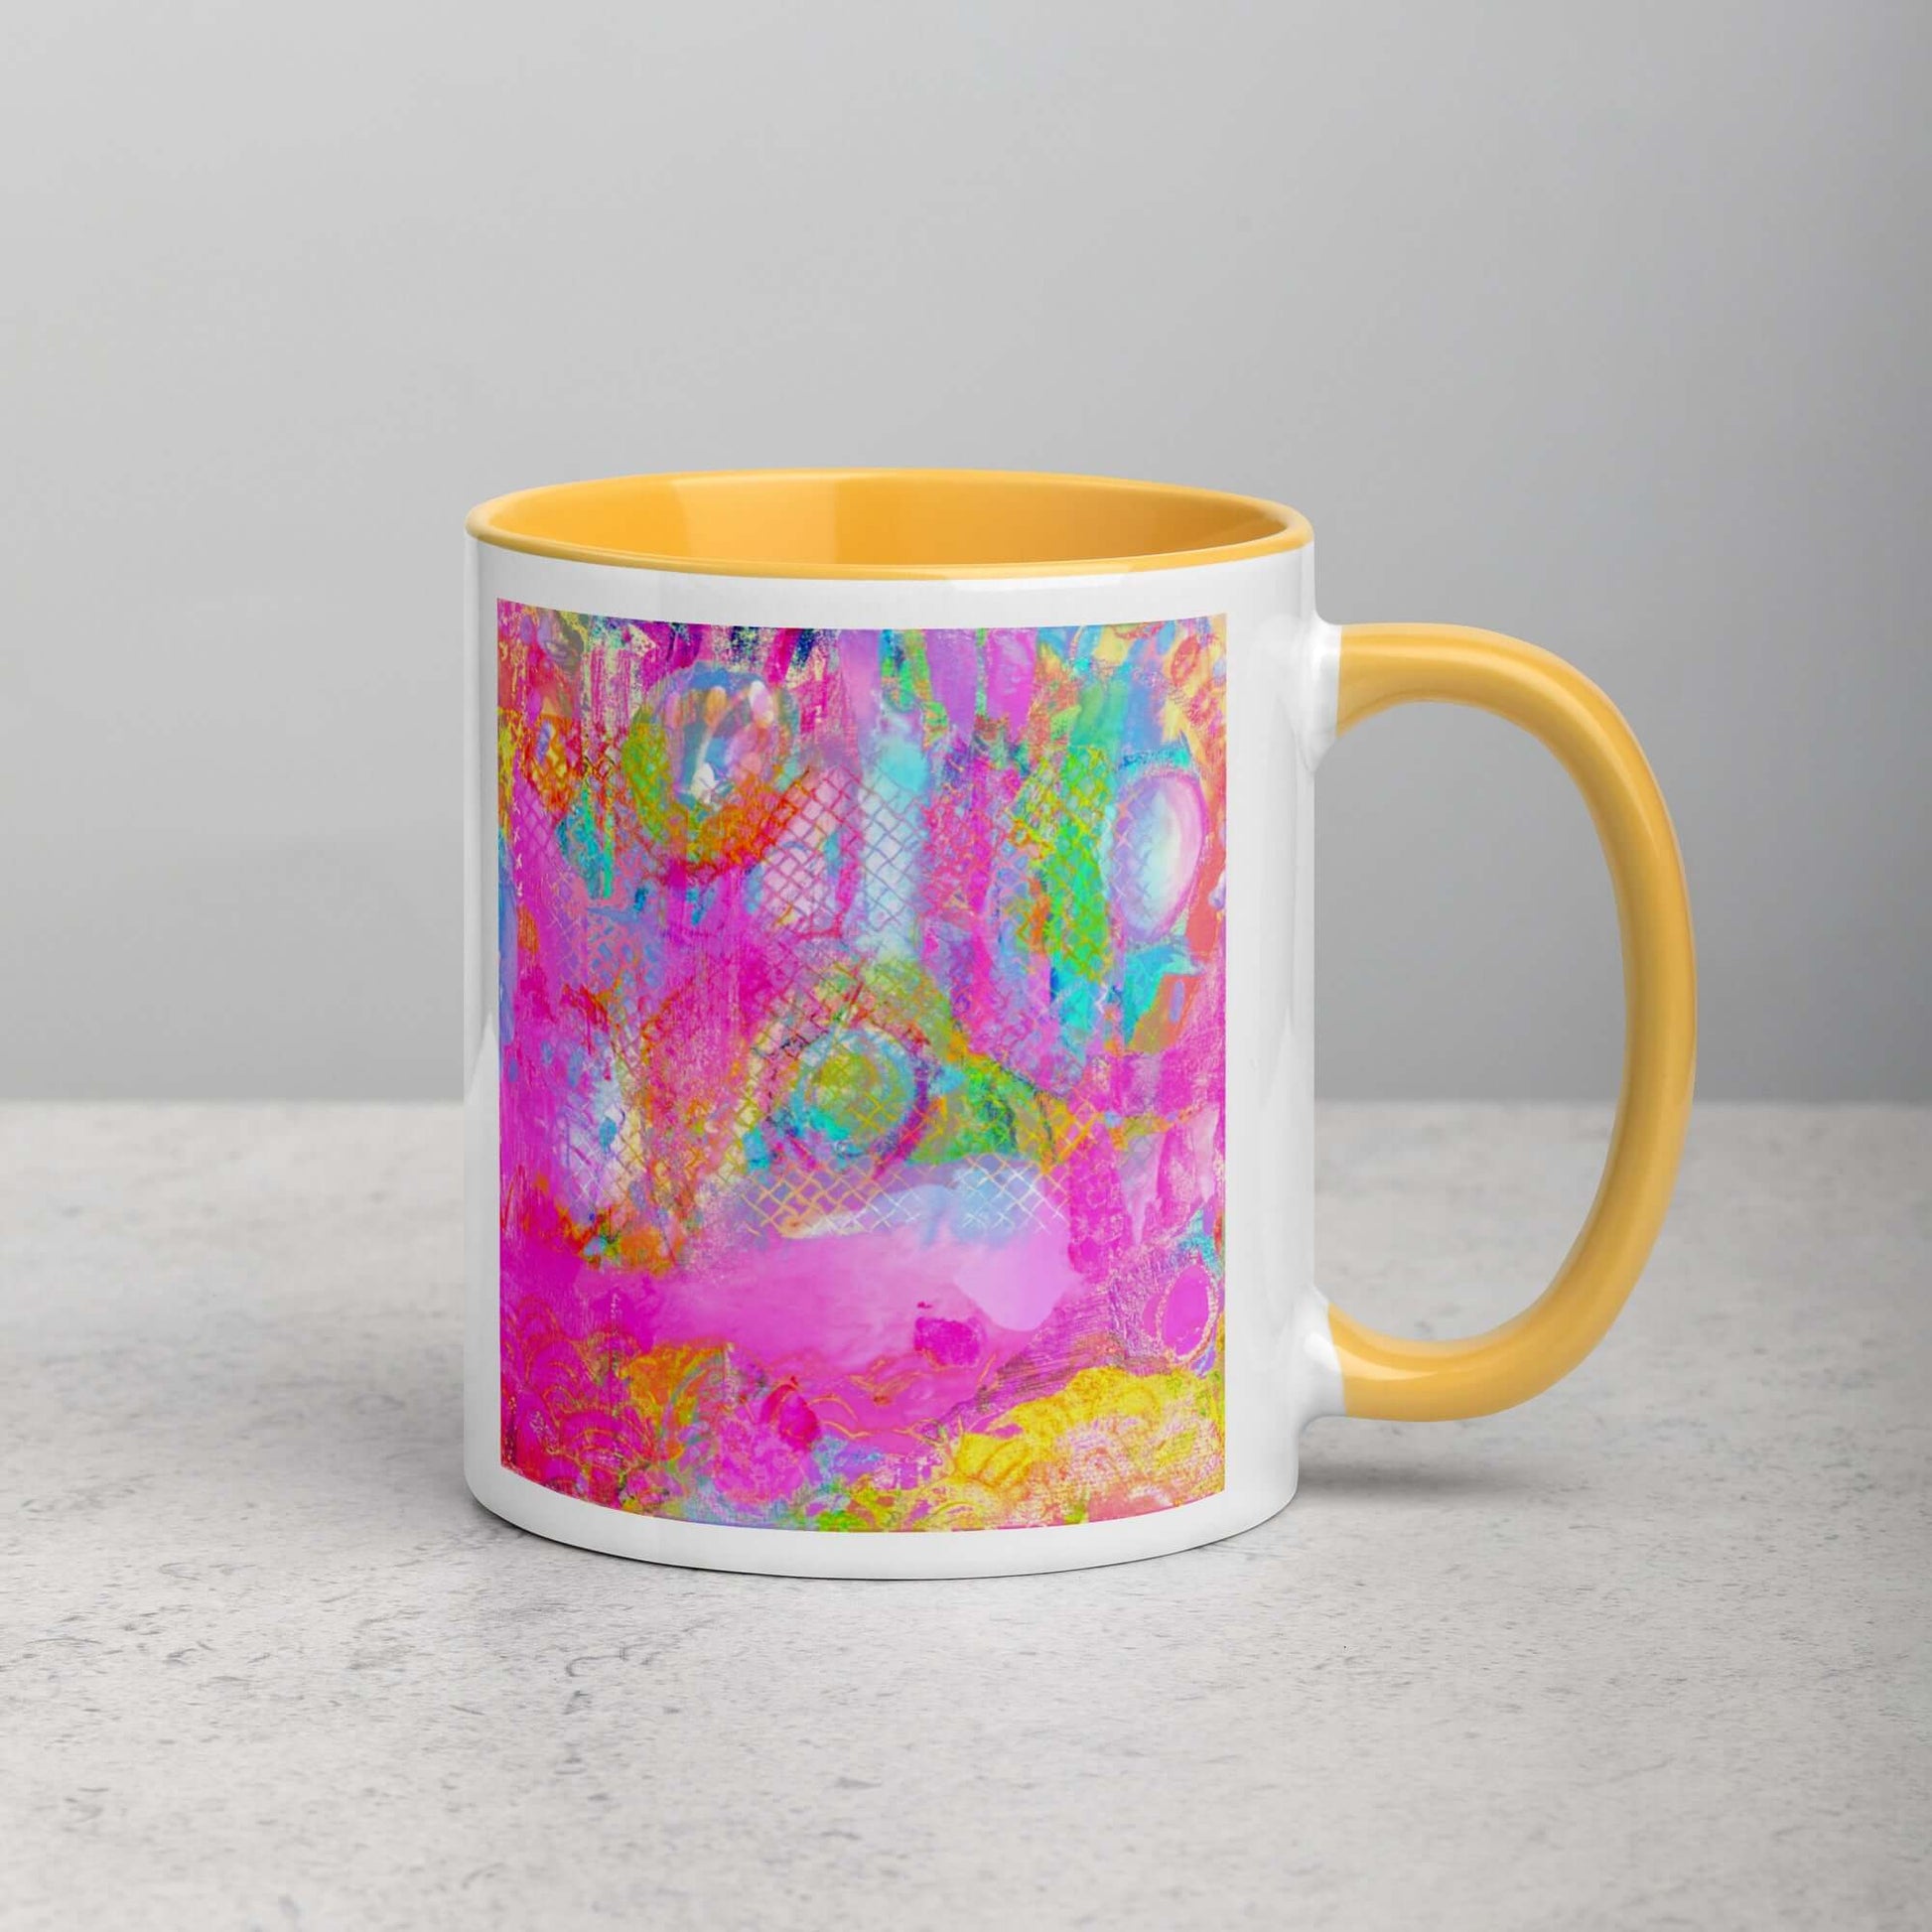  Drippy Pink “Candyland” Abstract Art Mug with Golden Yellow Color Inside Right Handed Front View